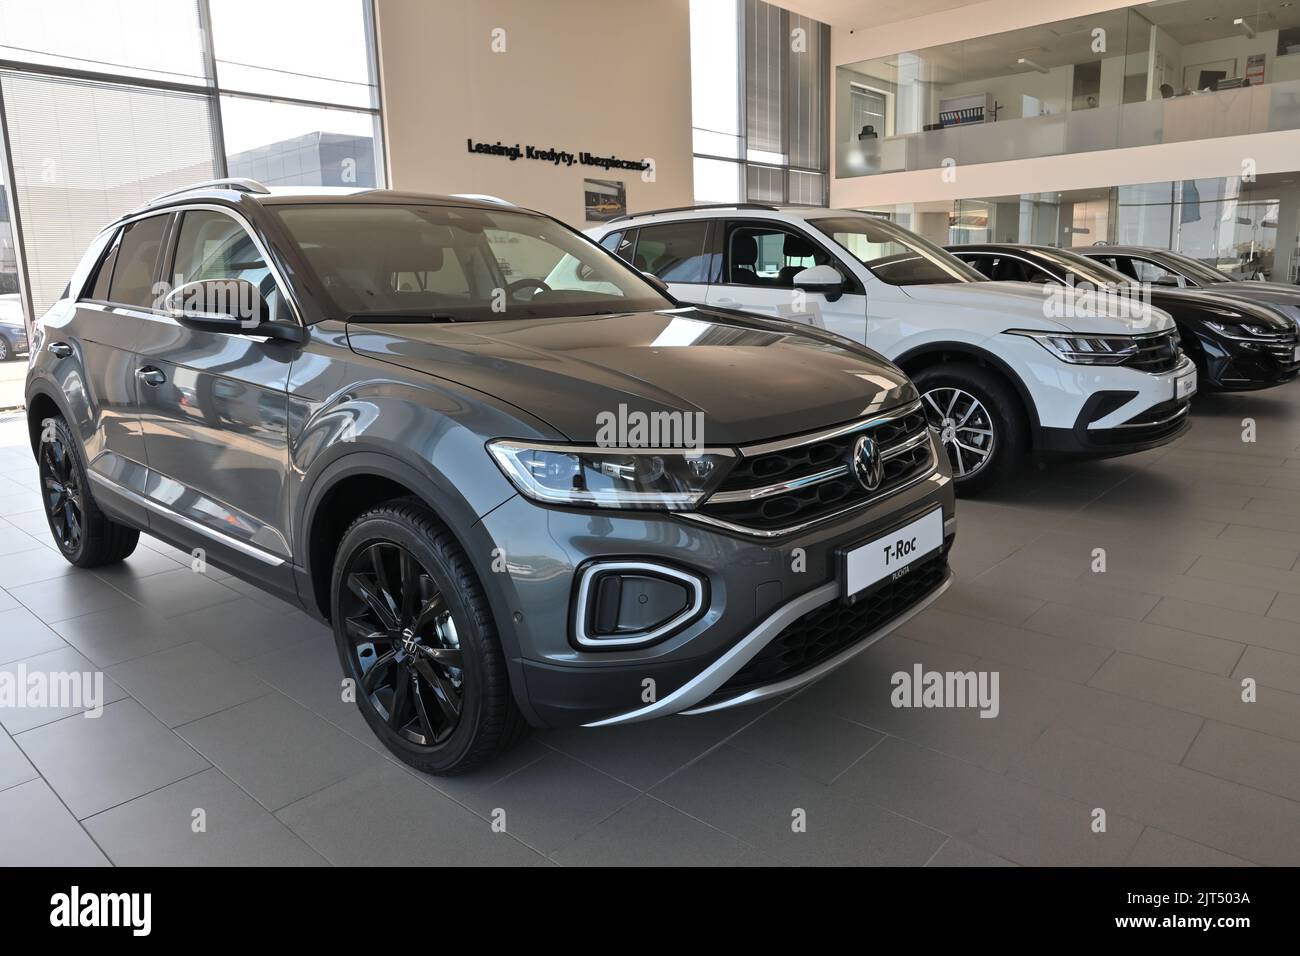 Gdansk, Poland - August 27, 2022: New model of Volkswagen T-Roc presented in the car showroom of Gdansk Stock Photo